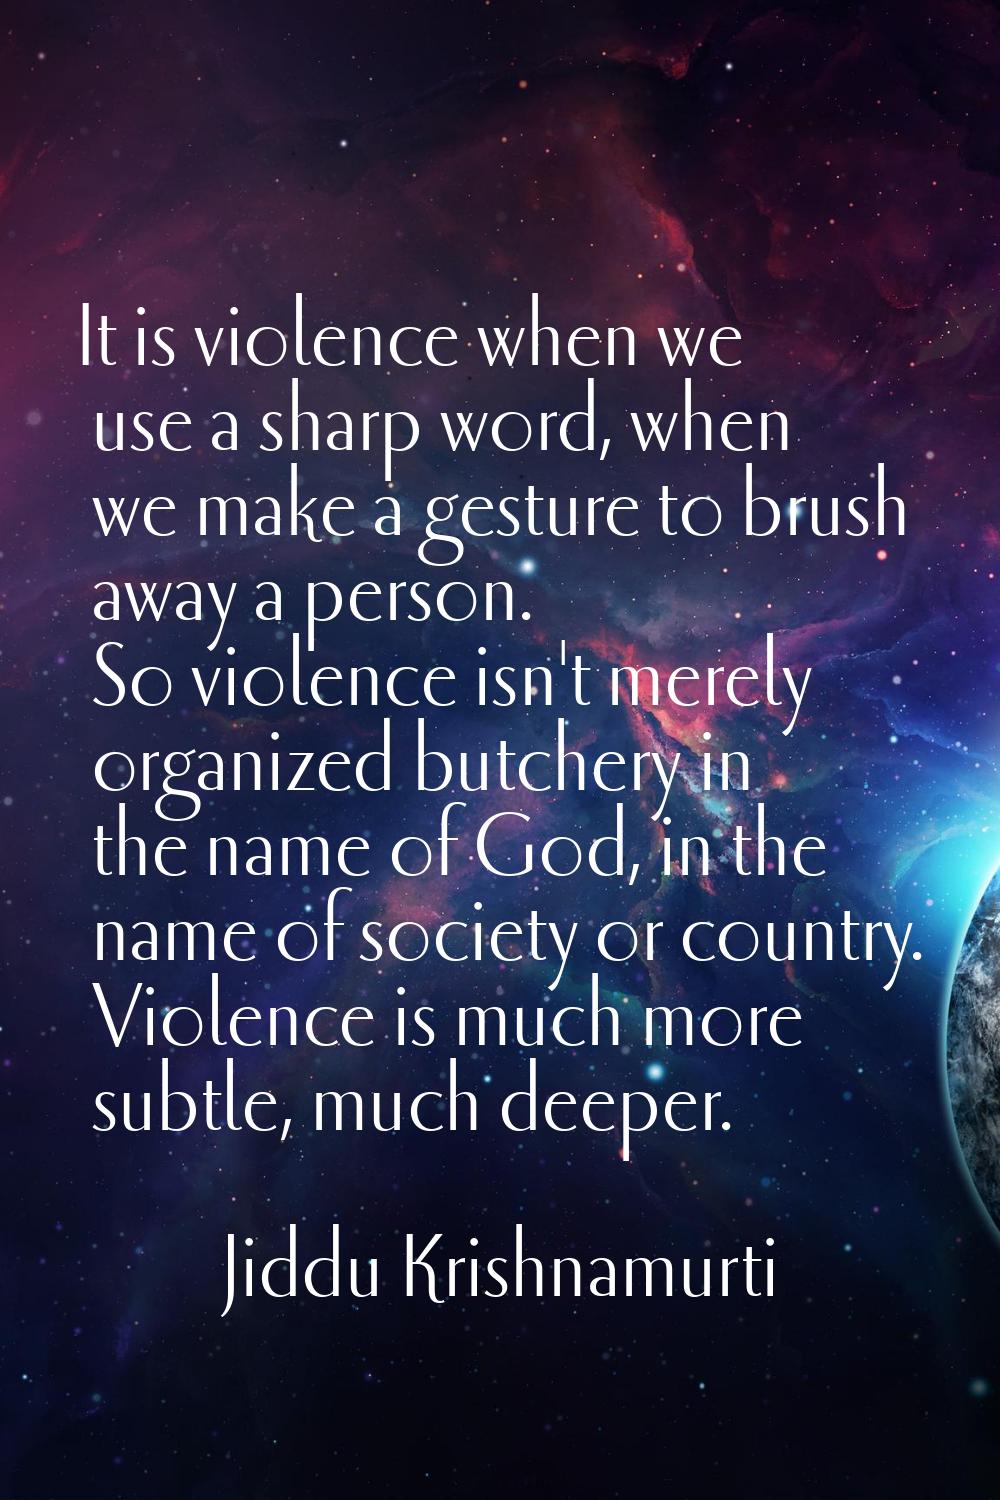 It is violence when we use a sharp word, when we make a gesture to brush away a person. So violence